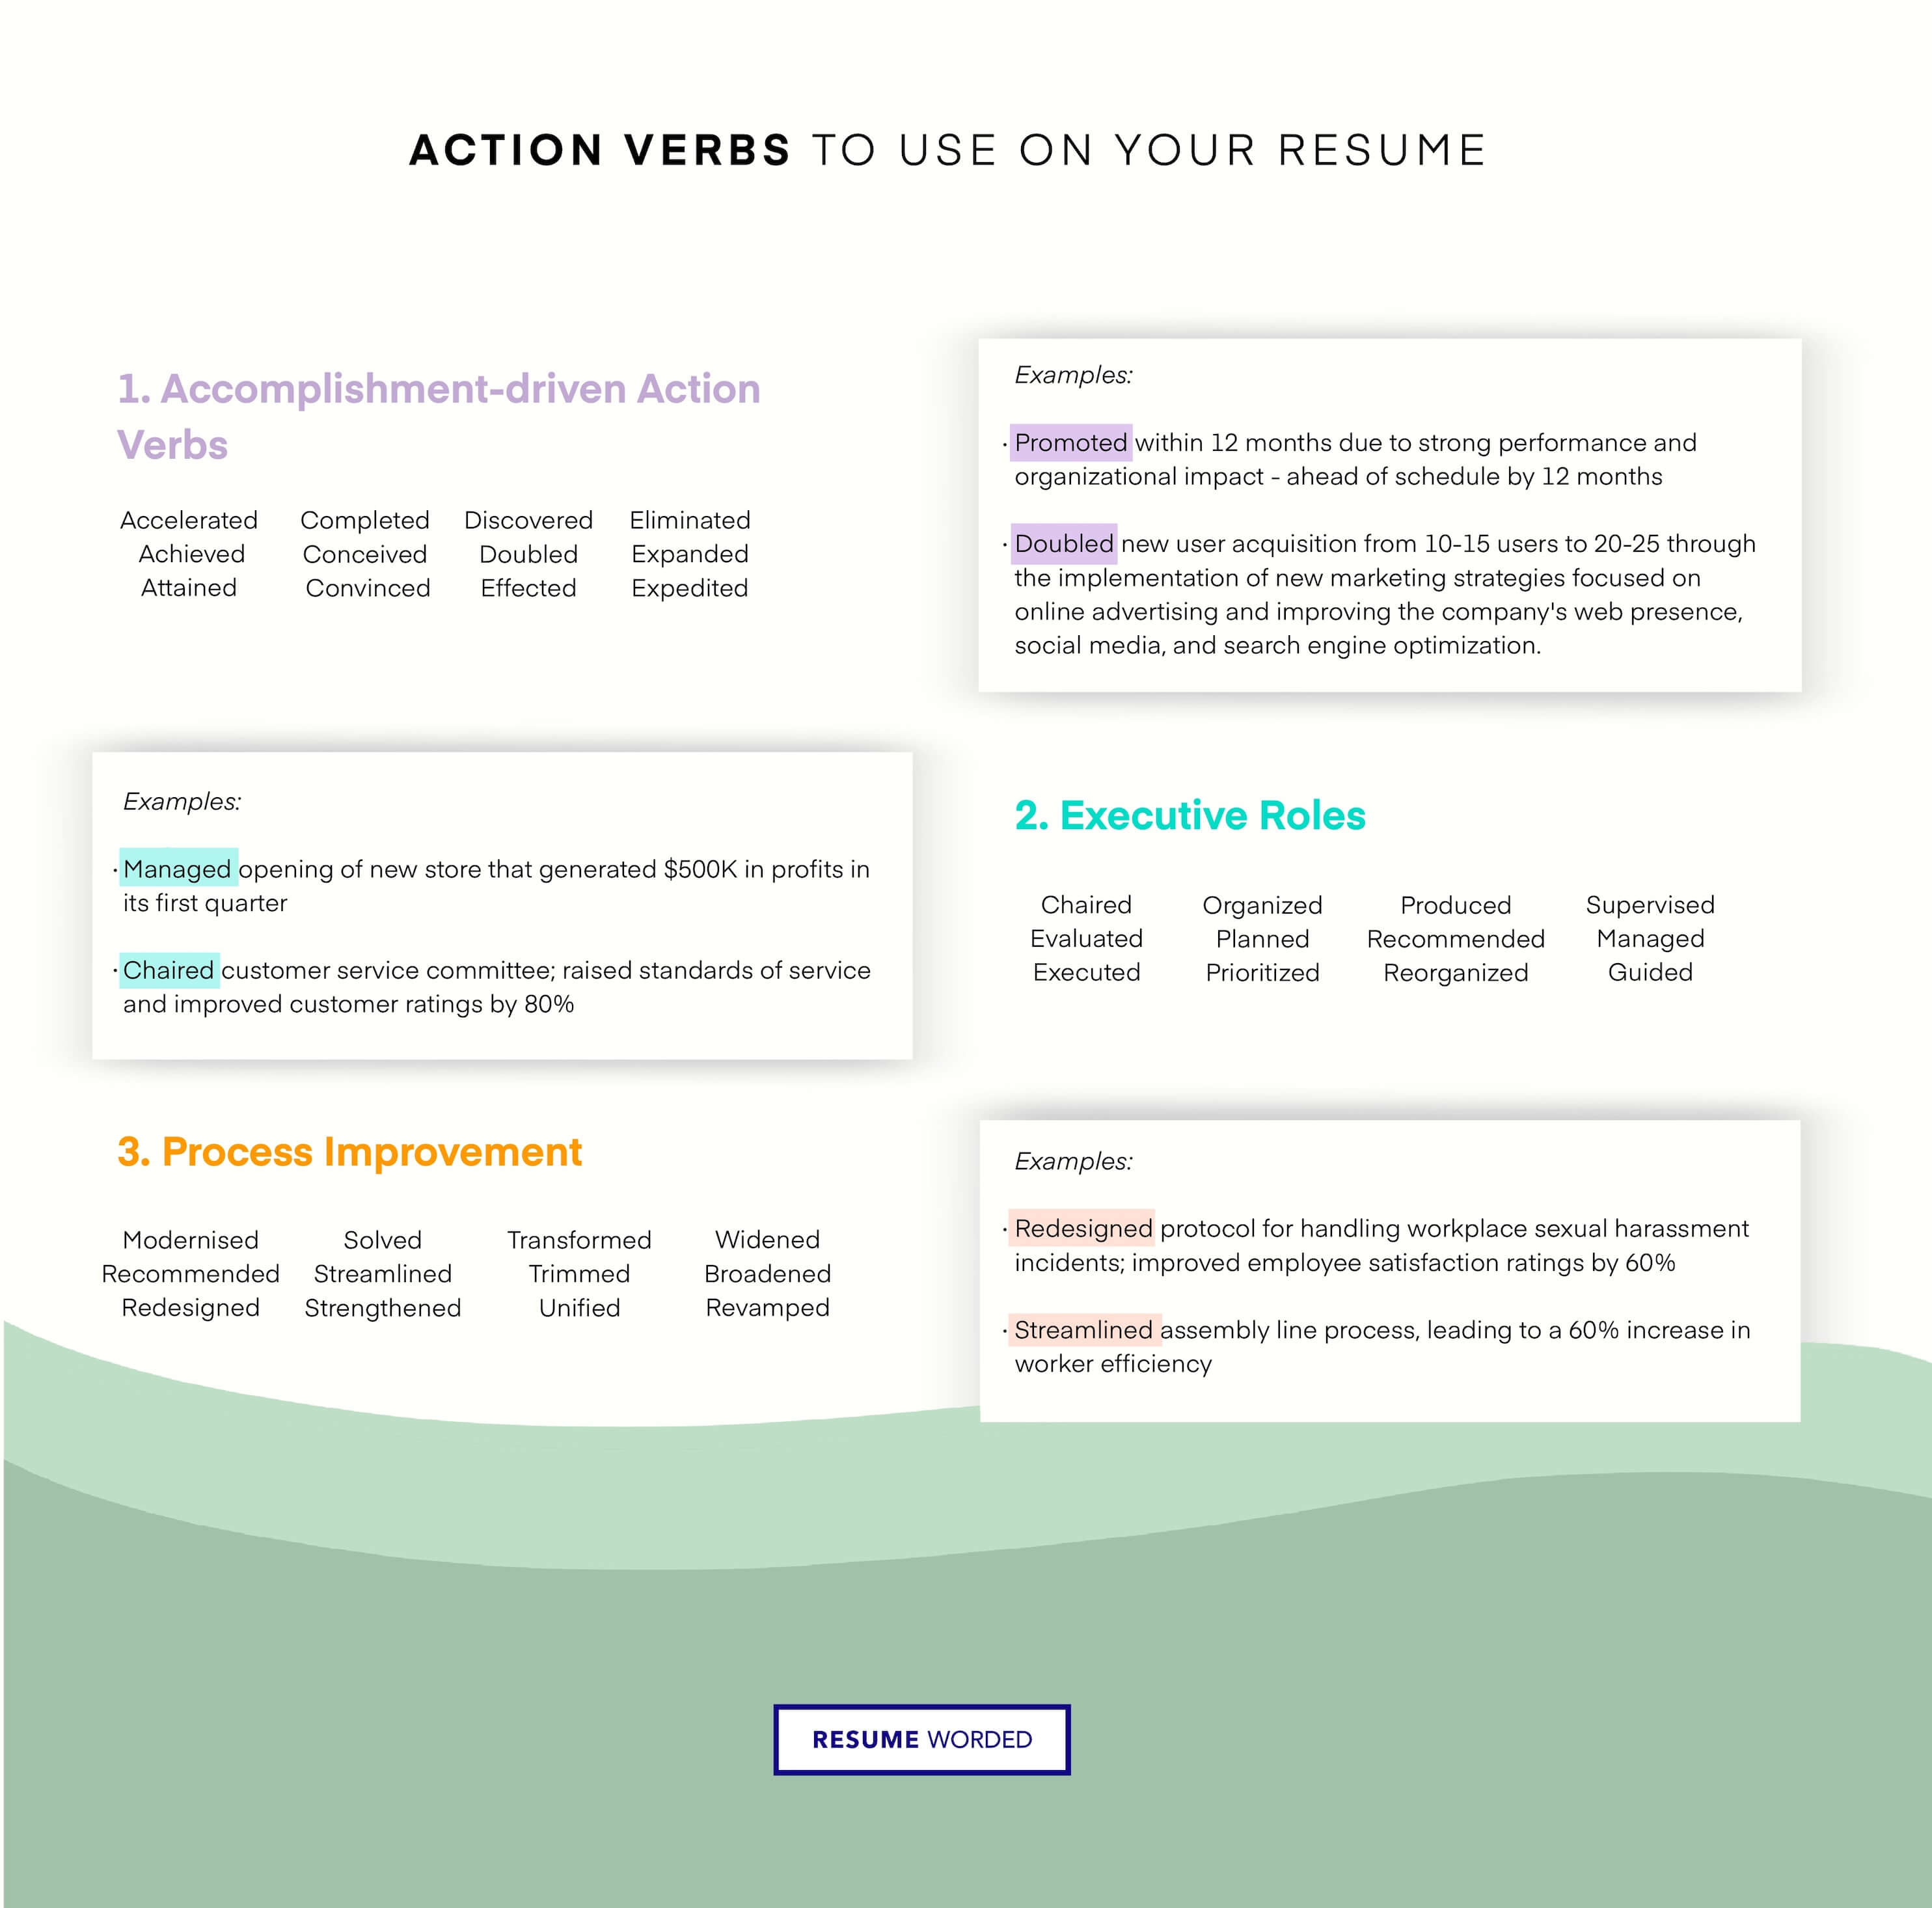 Use strong action verbs in your bullet points - Executive Assistant to CEO Resume